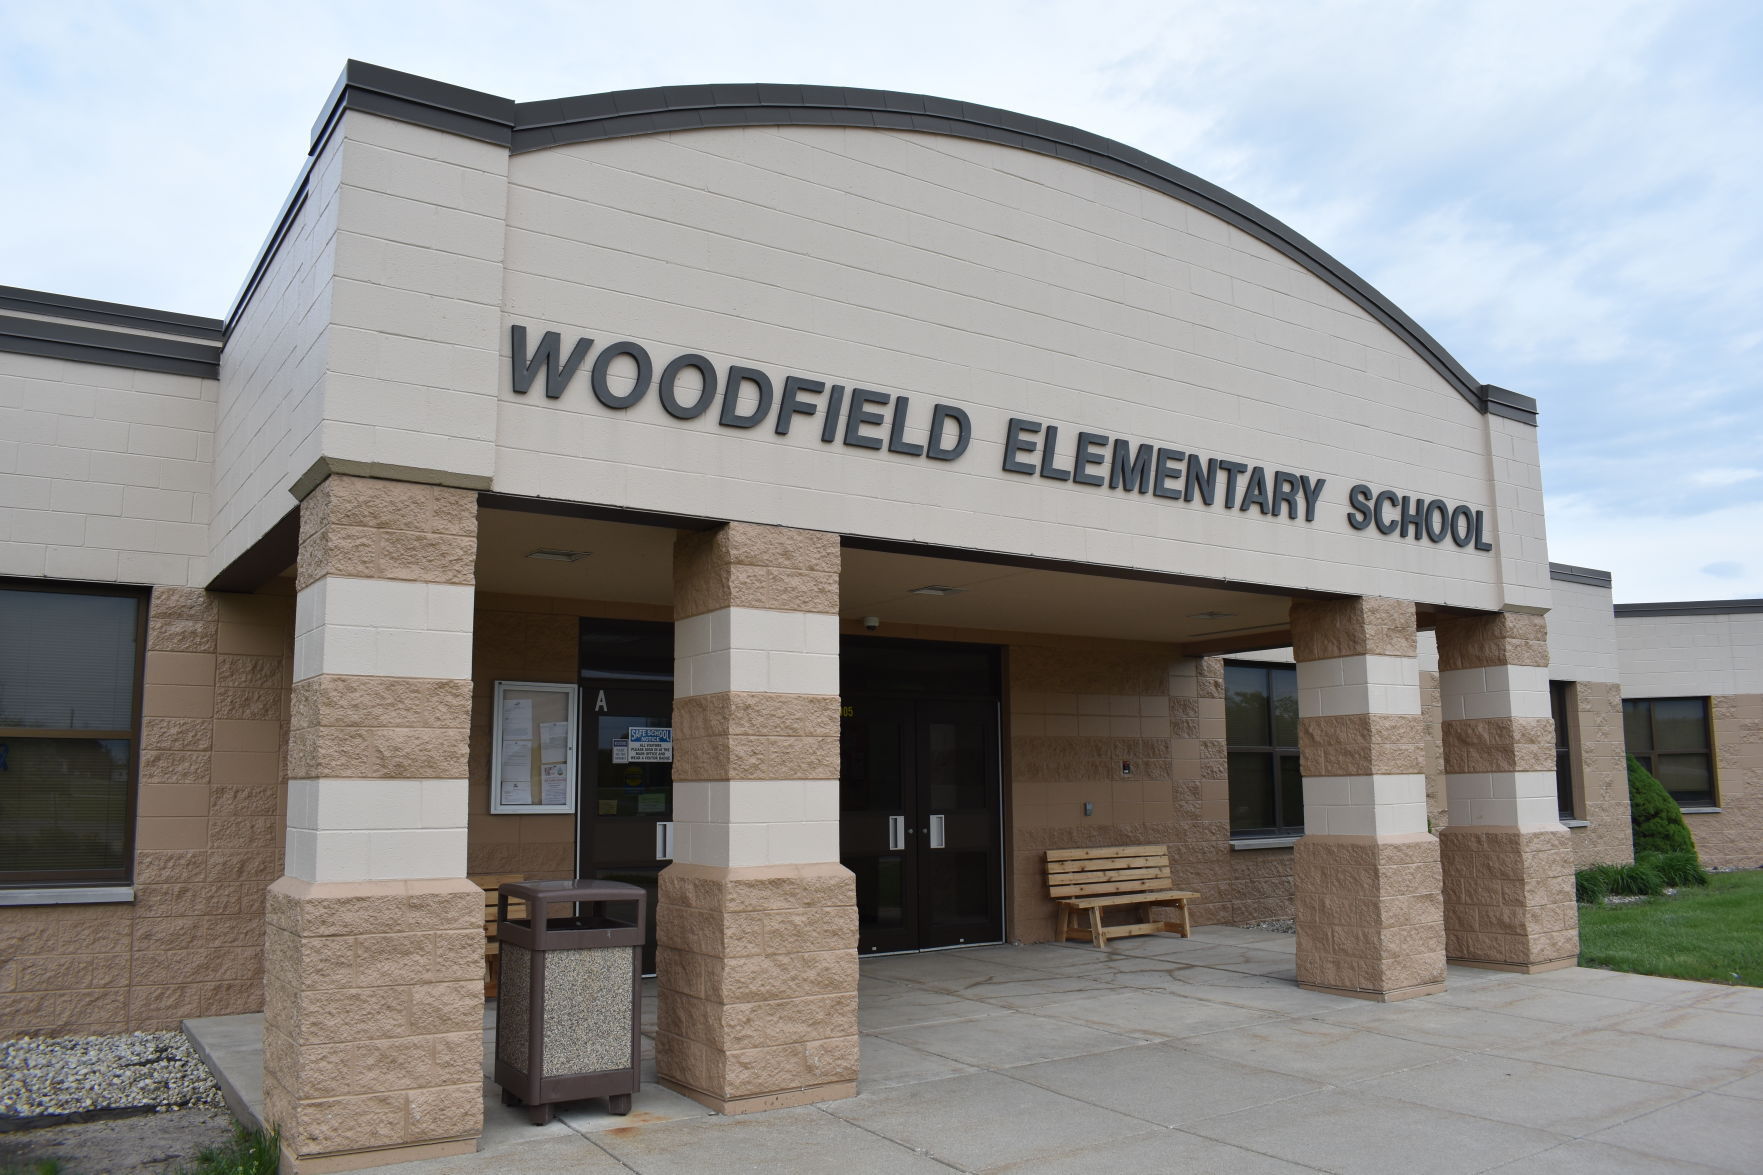 Simulated sex with a stuffed animal? Student behavior at Waterford elementary investigated